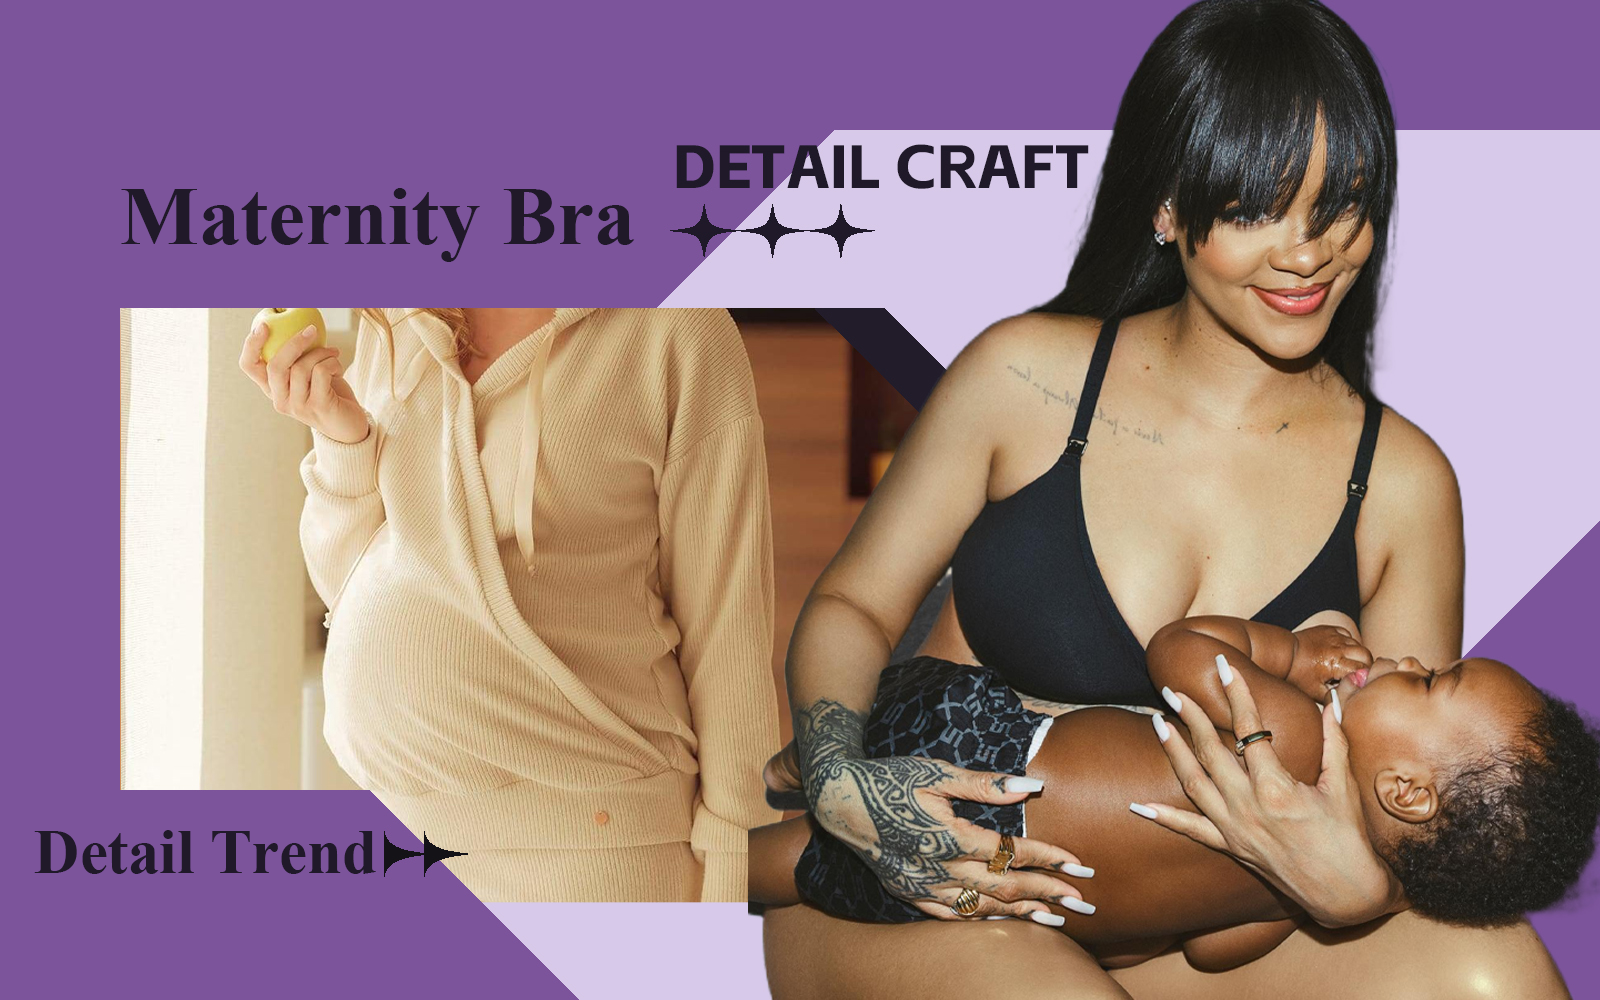 The Detail & Craft Trend for Maternity Homewear